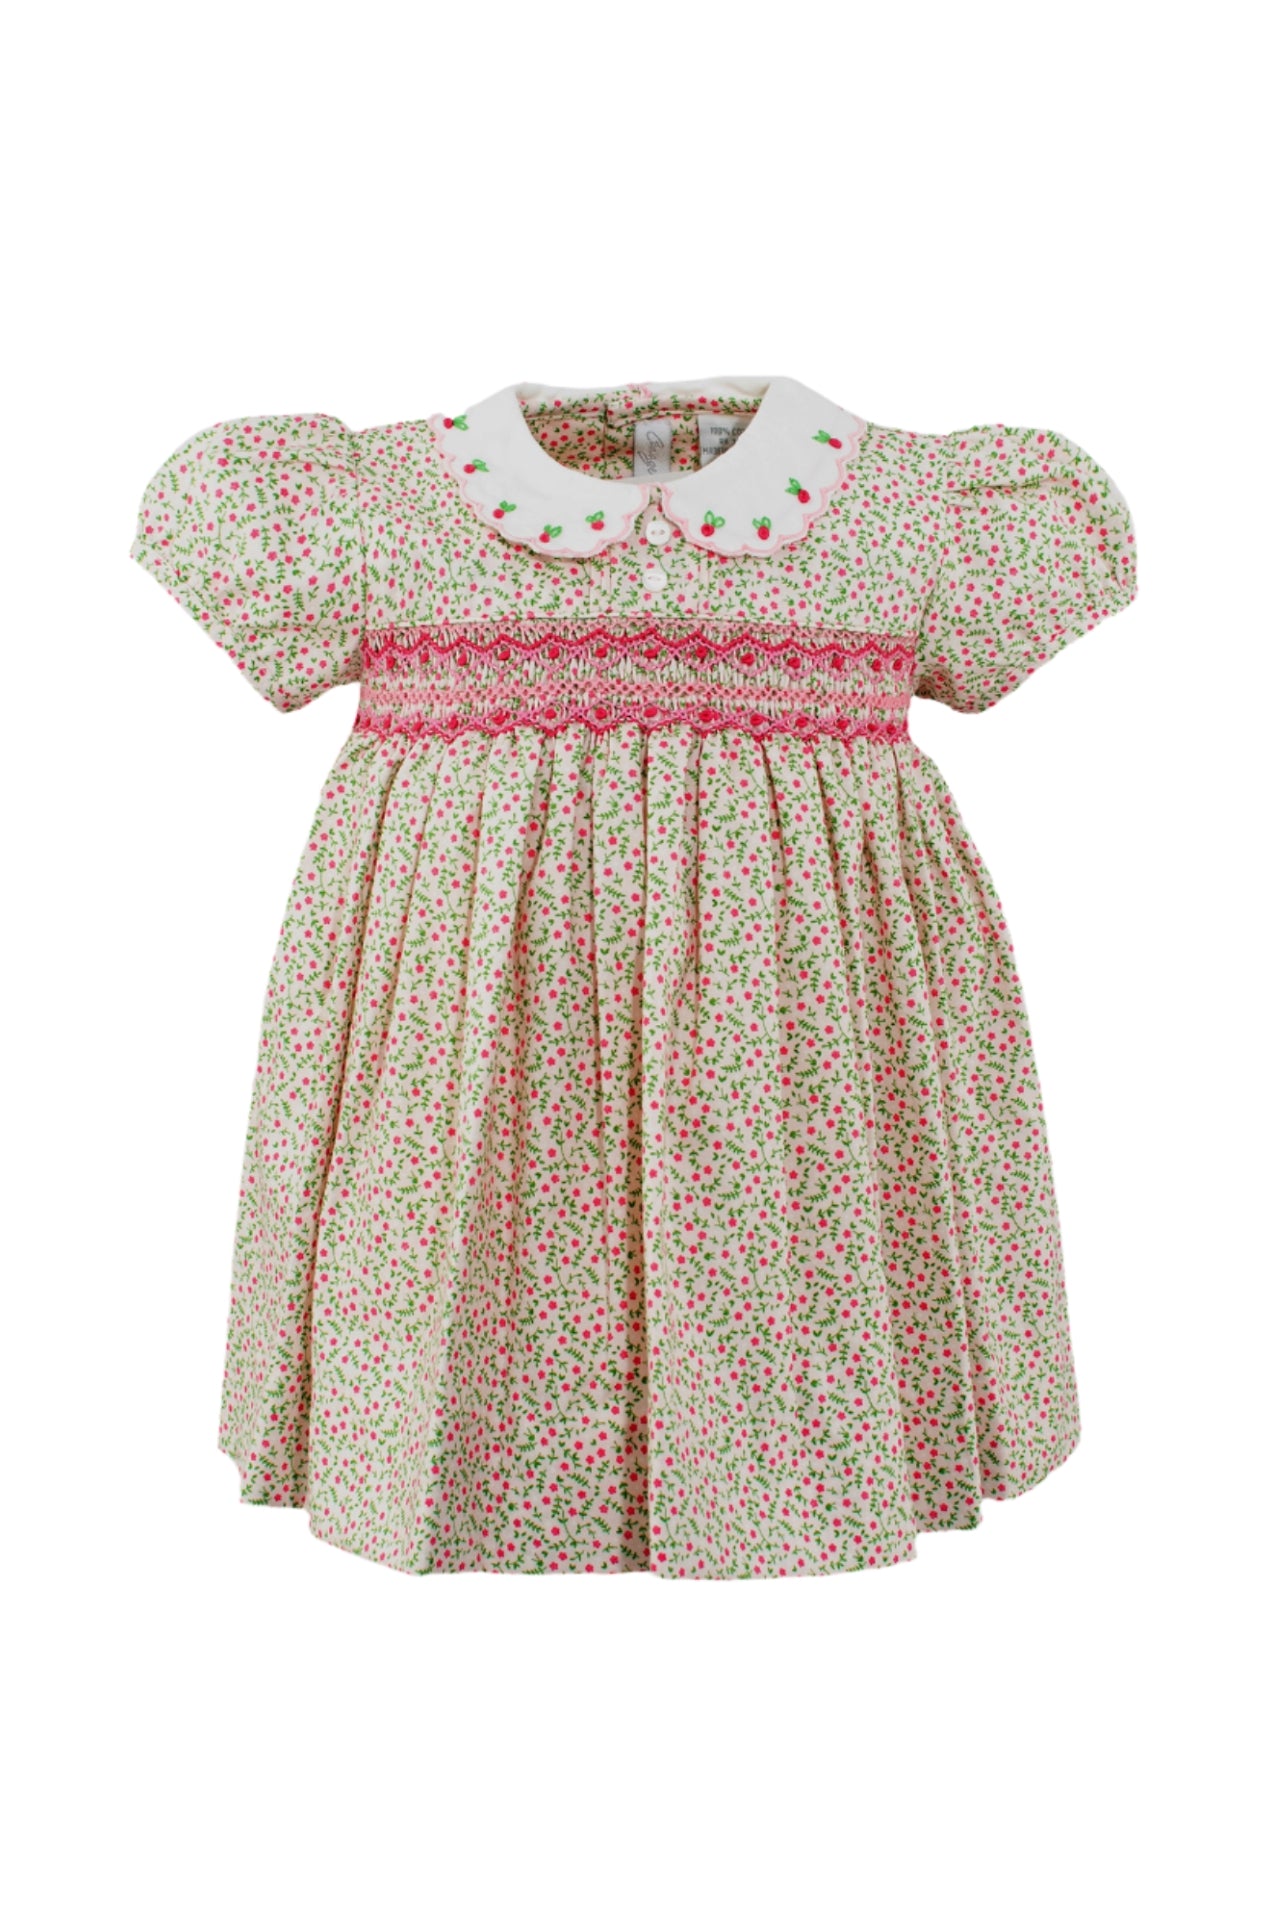 Tan Floral Smocked Baby Girl Dress with Panty 2